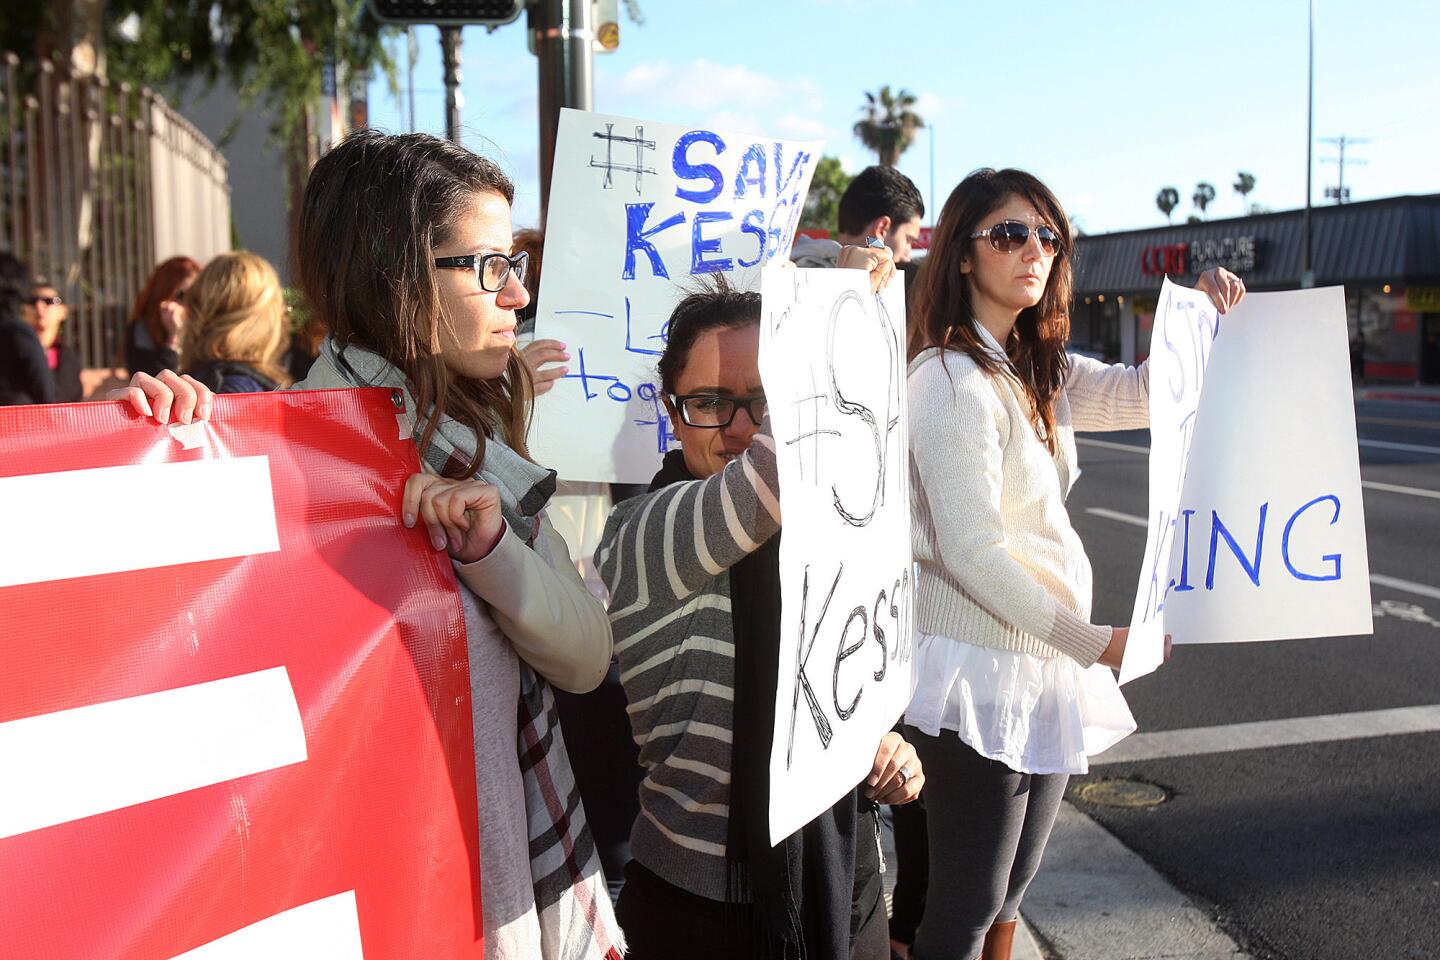 Arpi Nersessian, of Burbank, Sarineh Ratousi, of Glendale, and Rina Minassian, of Grenada Hills, hold signs to bring awareness to the assault on Kessab, Syria, in front of the Consulate General Of Armenia in Los Angeles in Glendale on the corner of Central Avenue and Lexington Drive on Monday, March 31, 2014. Kessab is in Syria and was attacked by Al-Qaeda rebels, and local Armenians are gathering at the Consulate to bring attention to the atrocity.